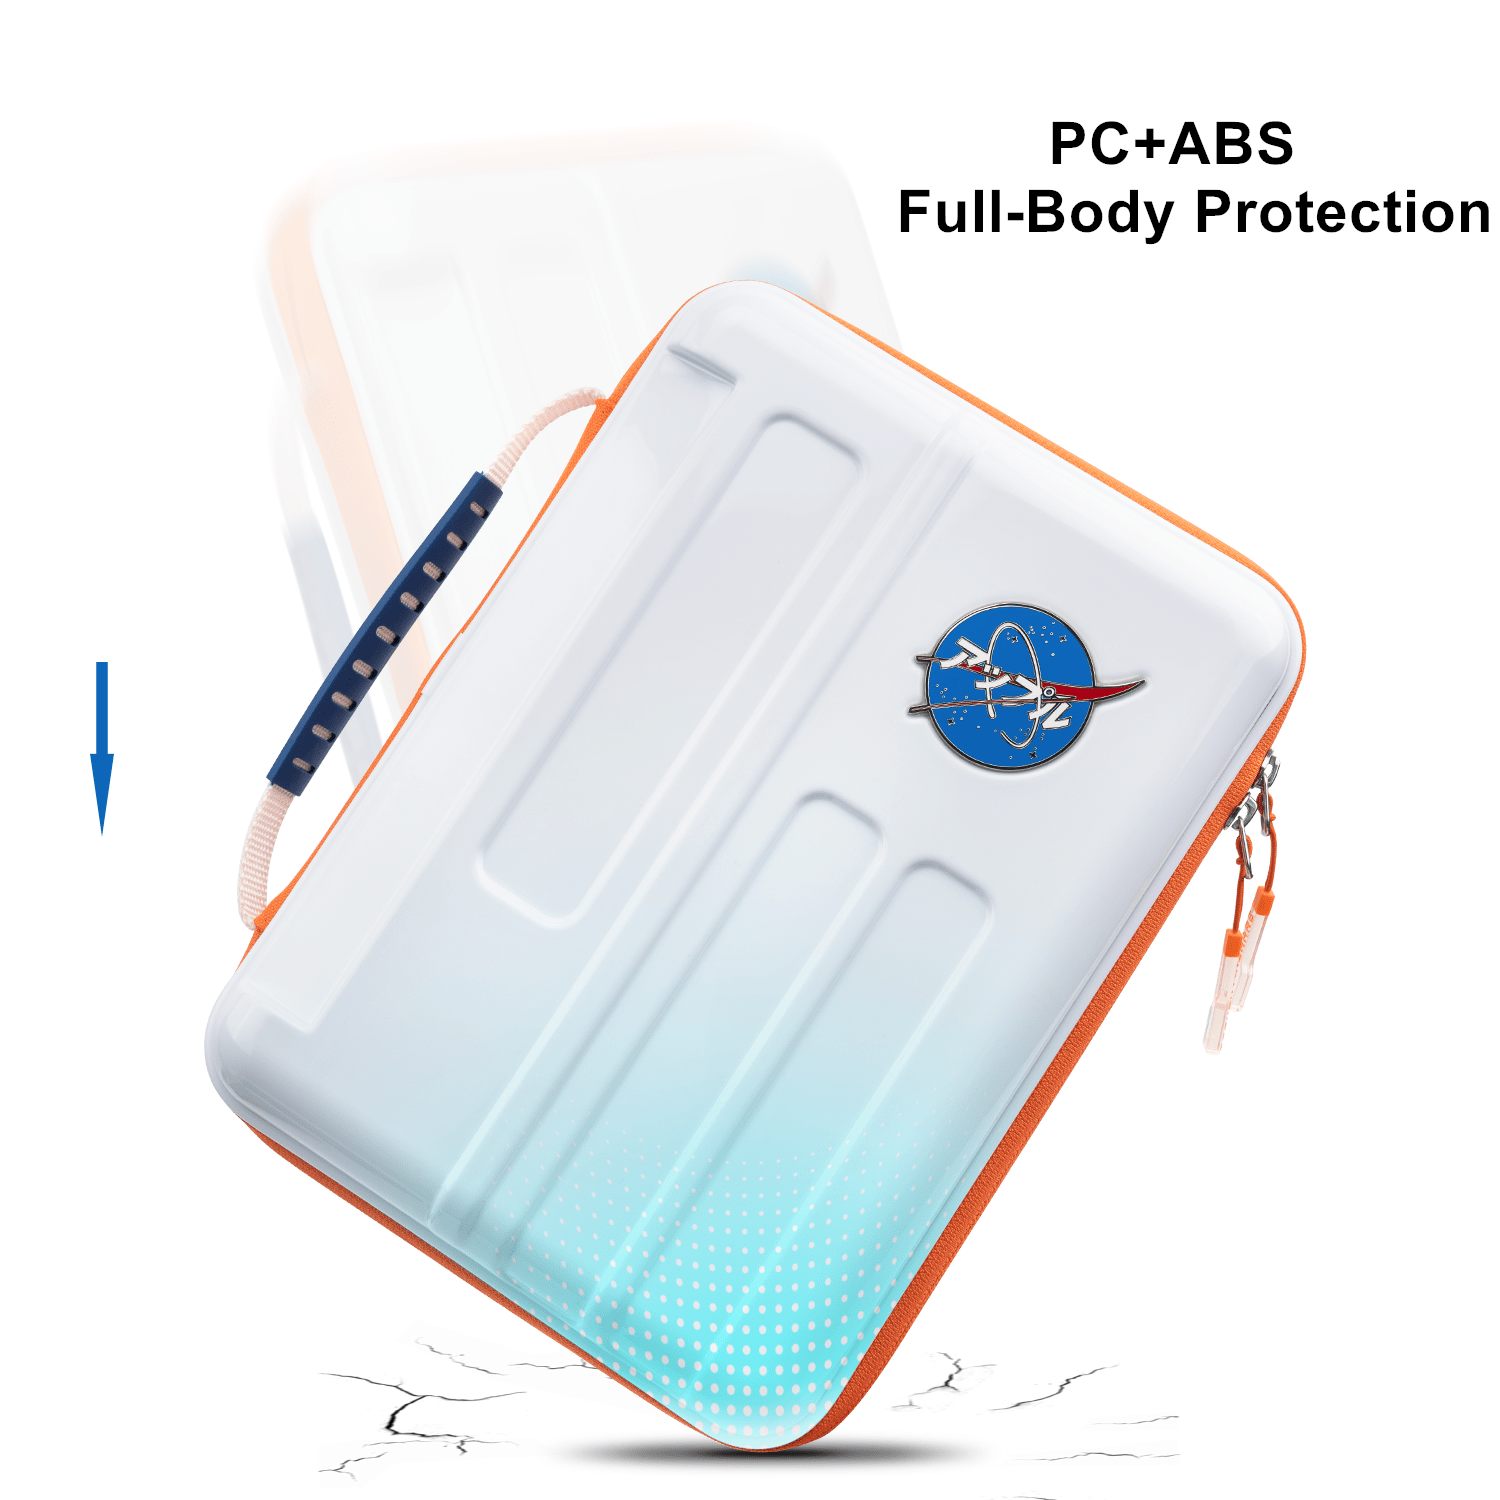 GeekShare Space Travel Carrying Bag for iPad Pro/Air 4